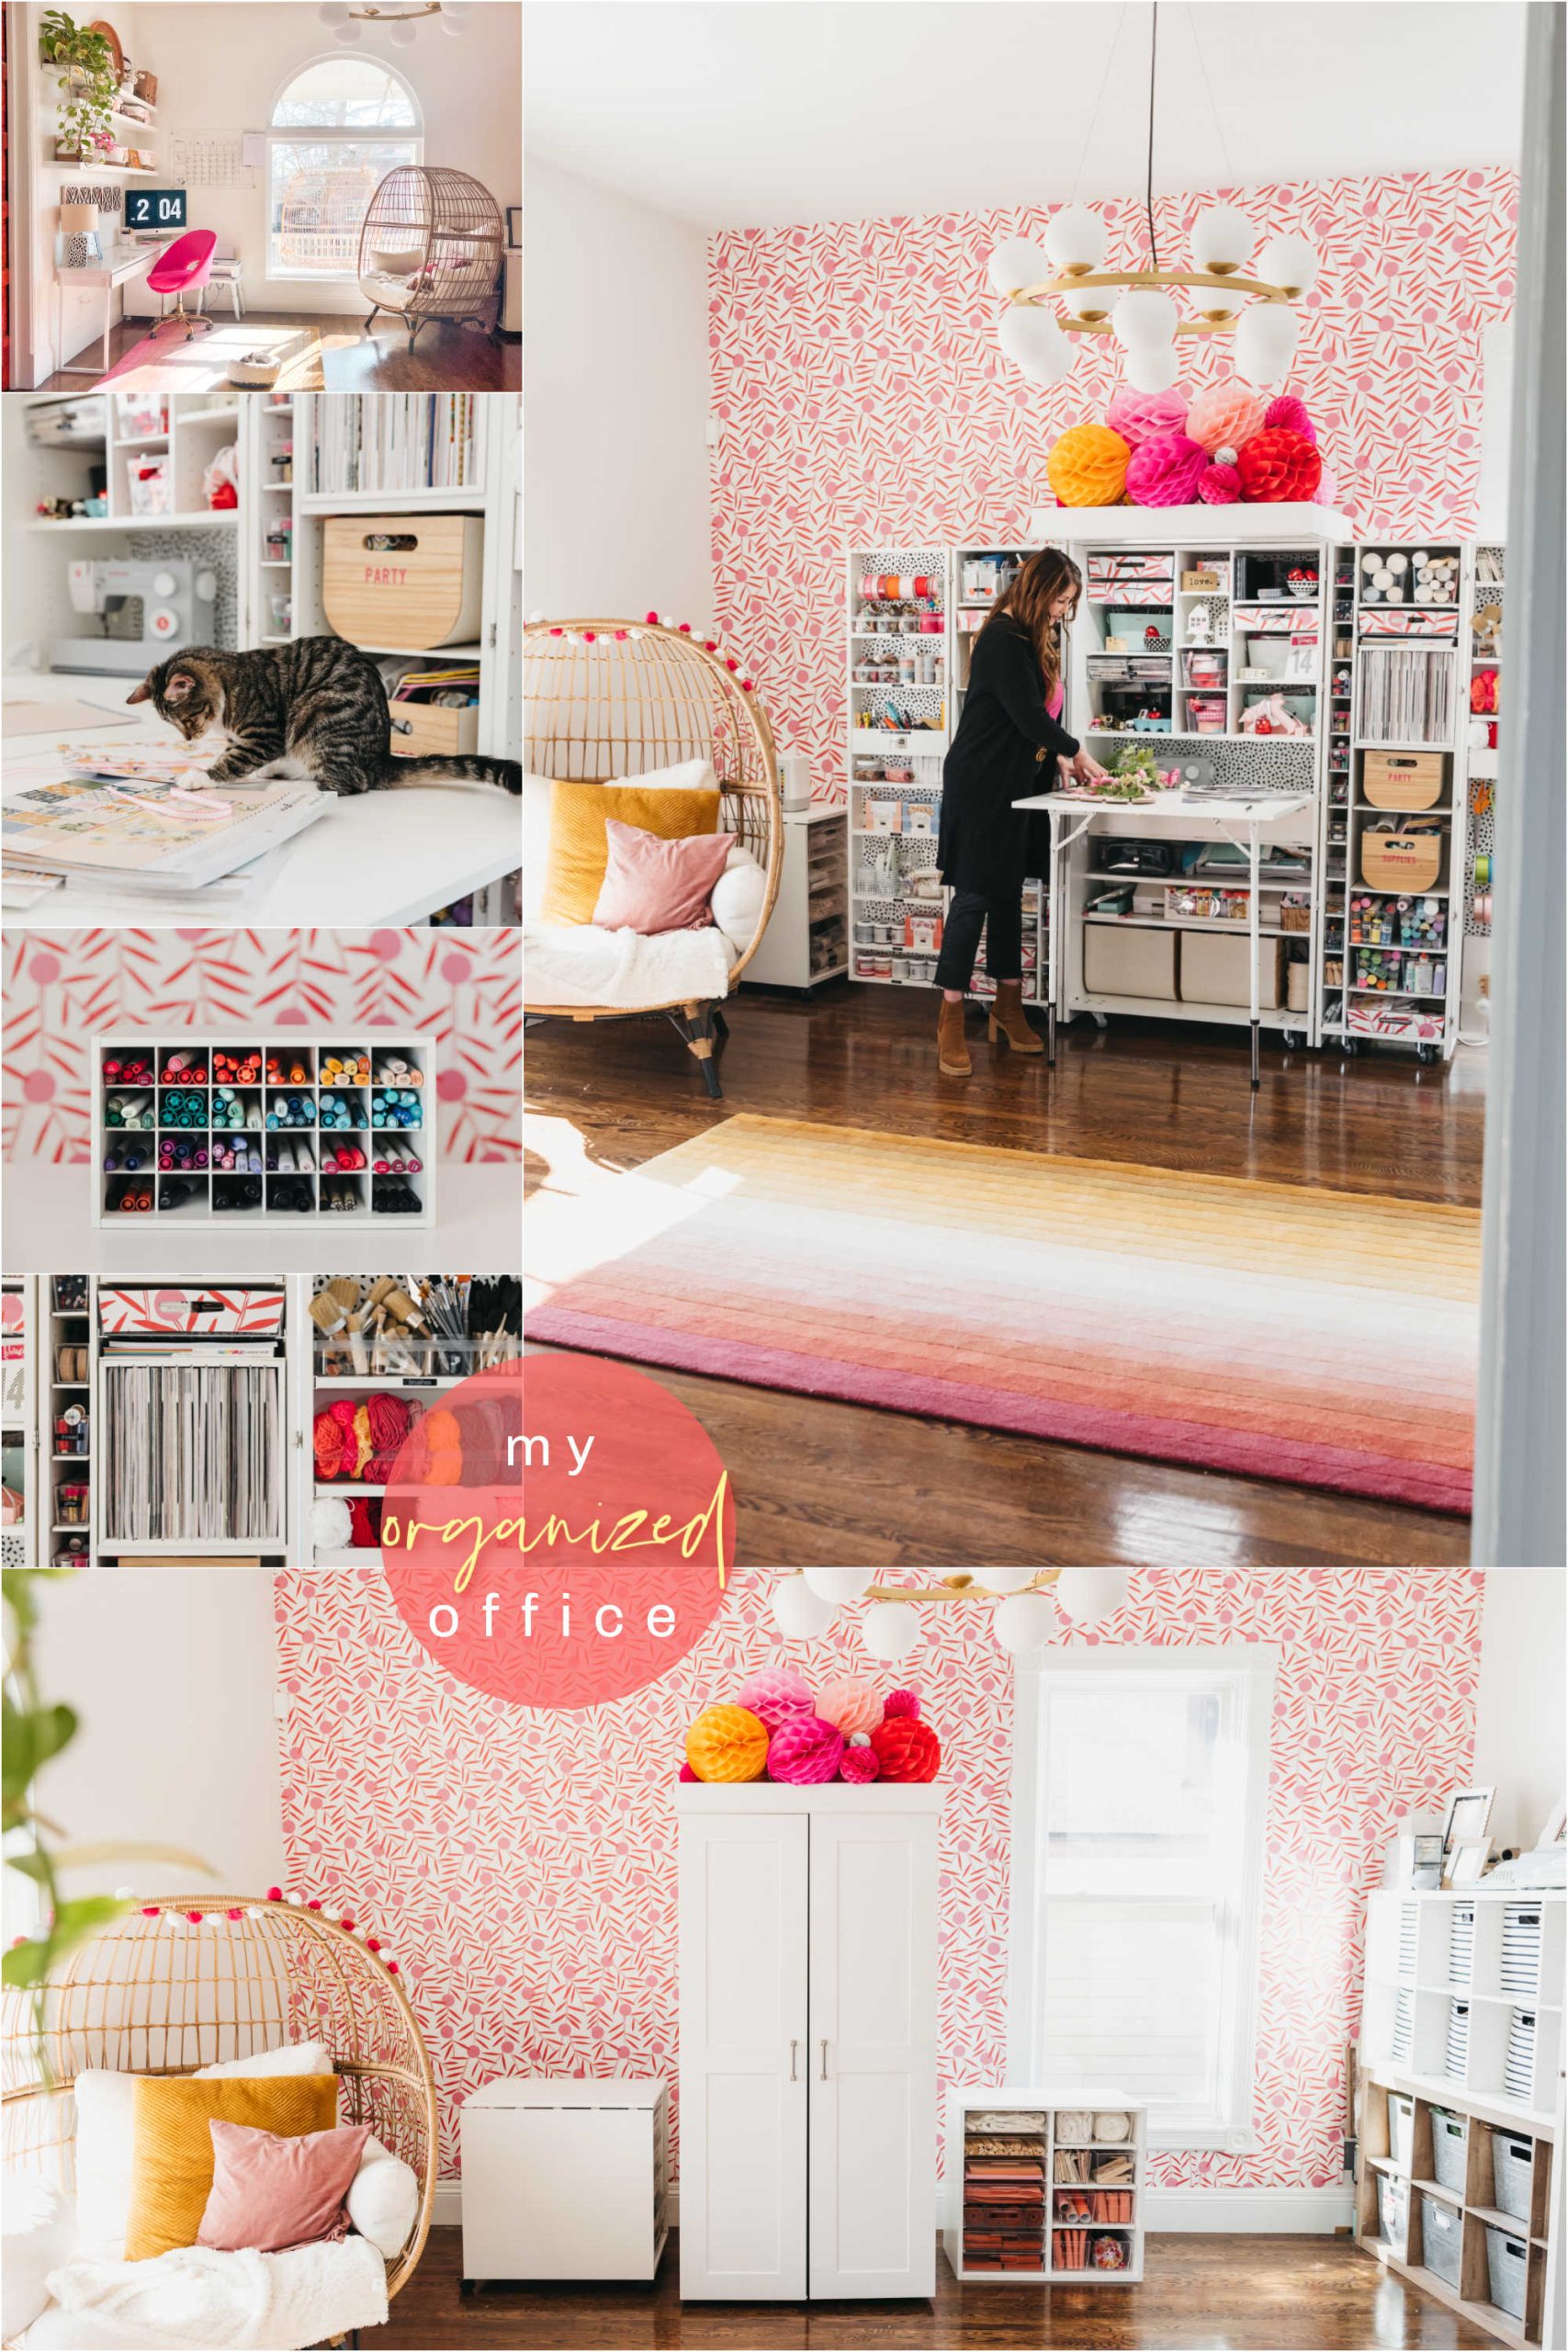 Easy ways to get your office or craft room organized for the new year! 